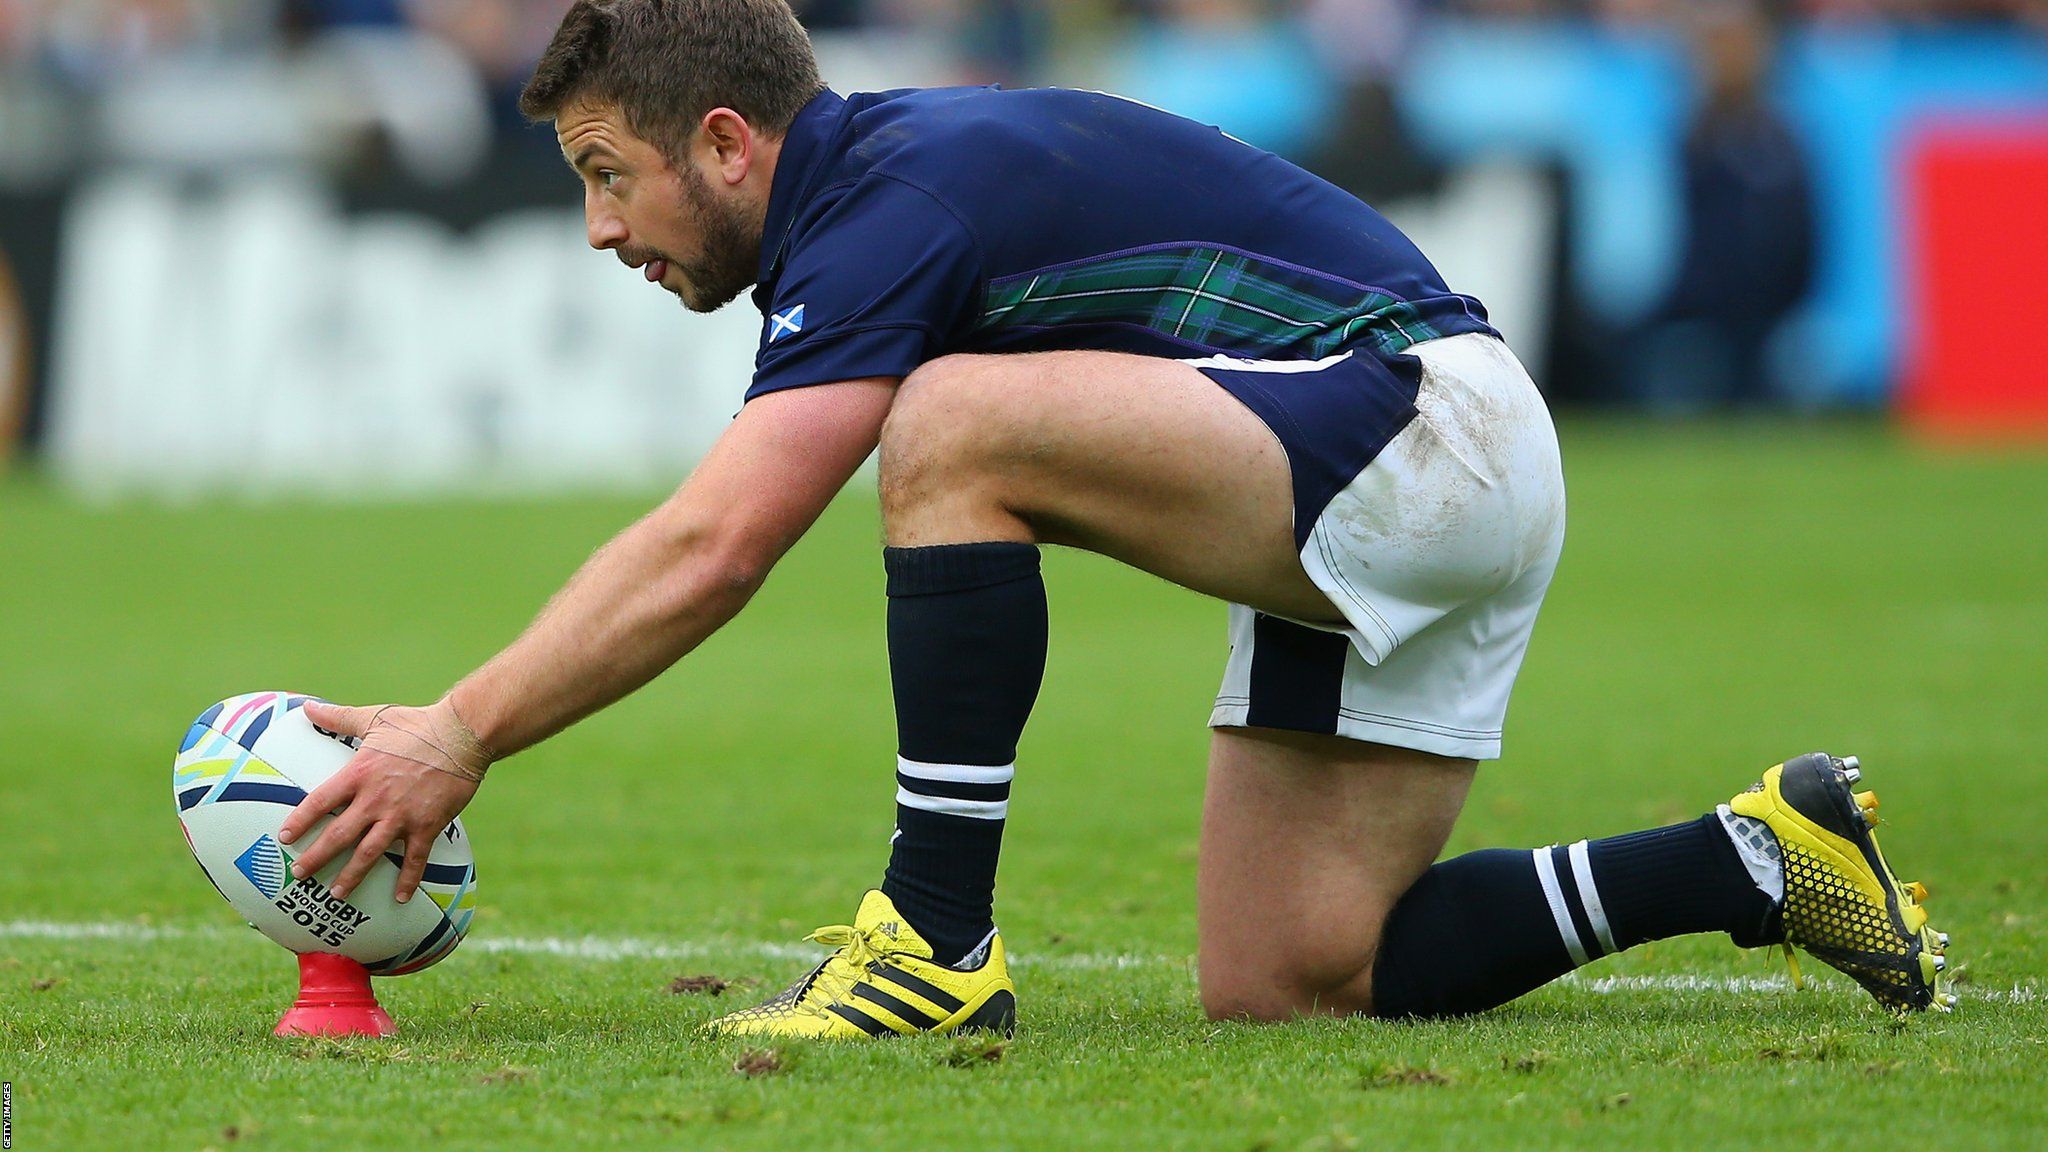 Greig Laidlaw lines up a shot at goal